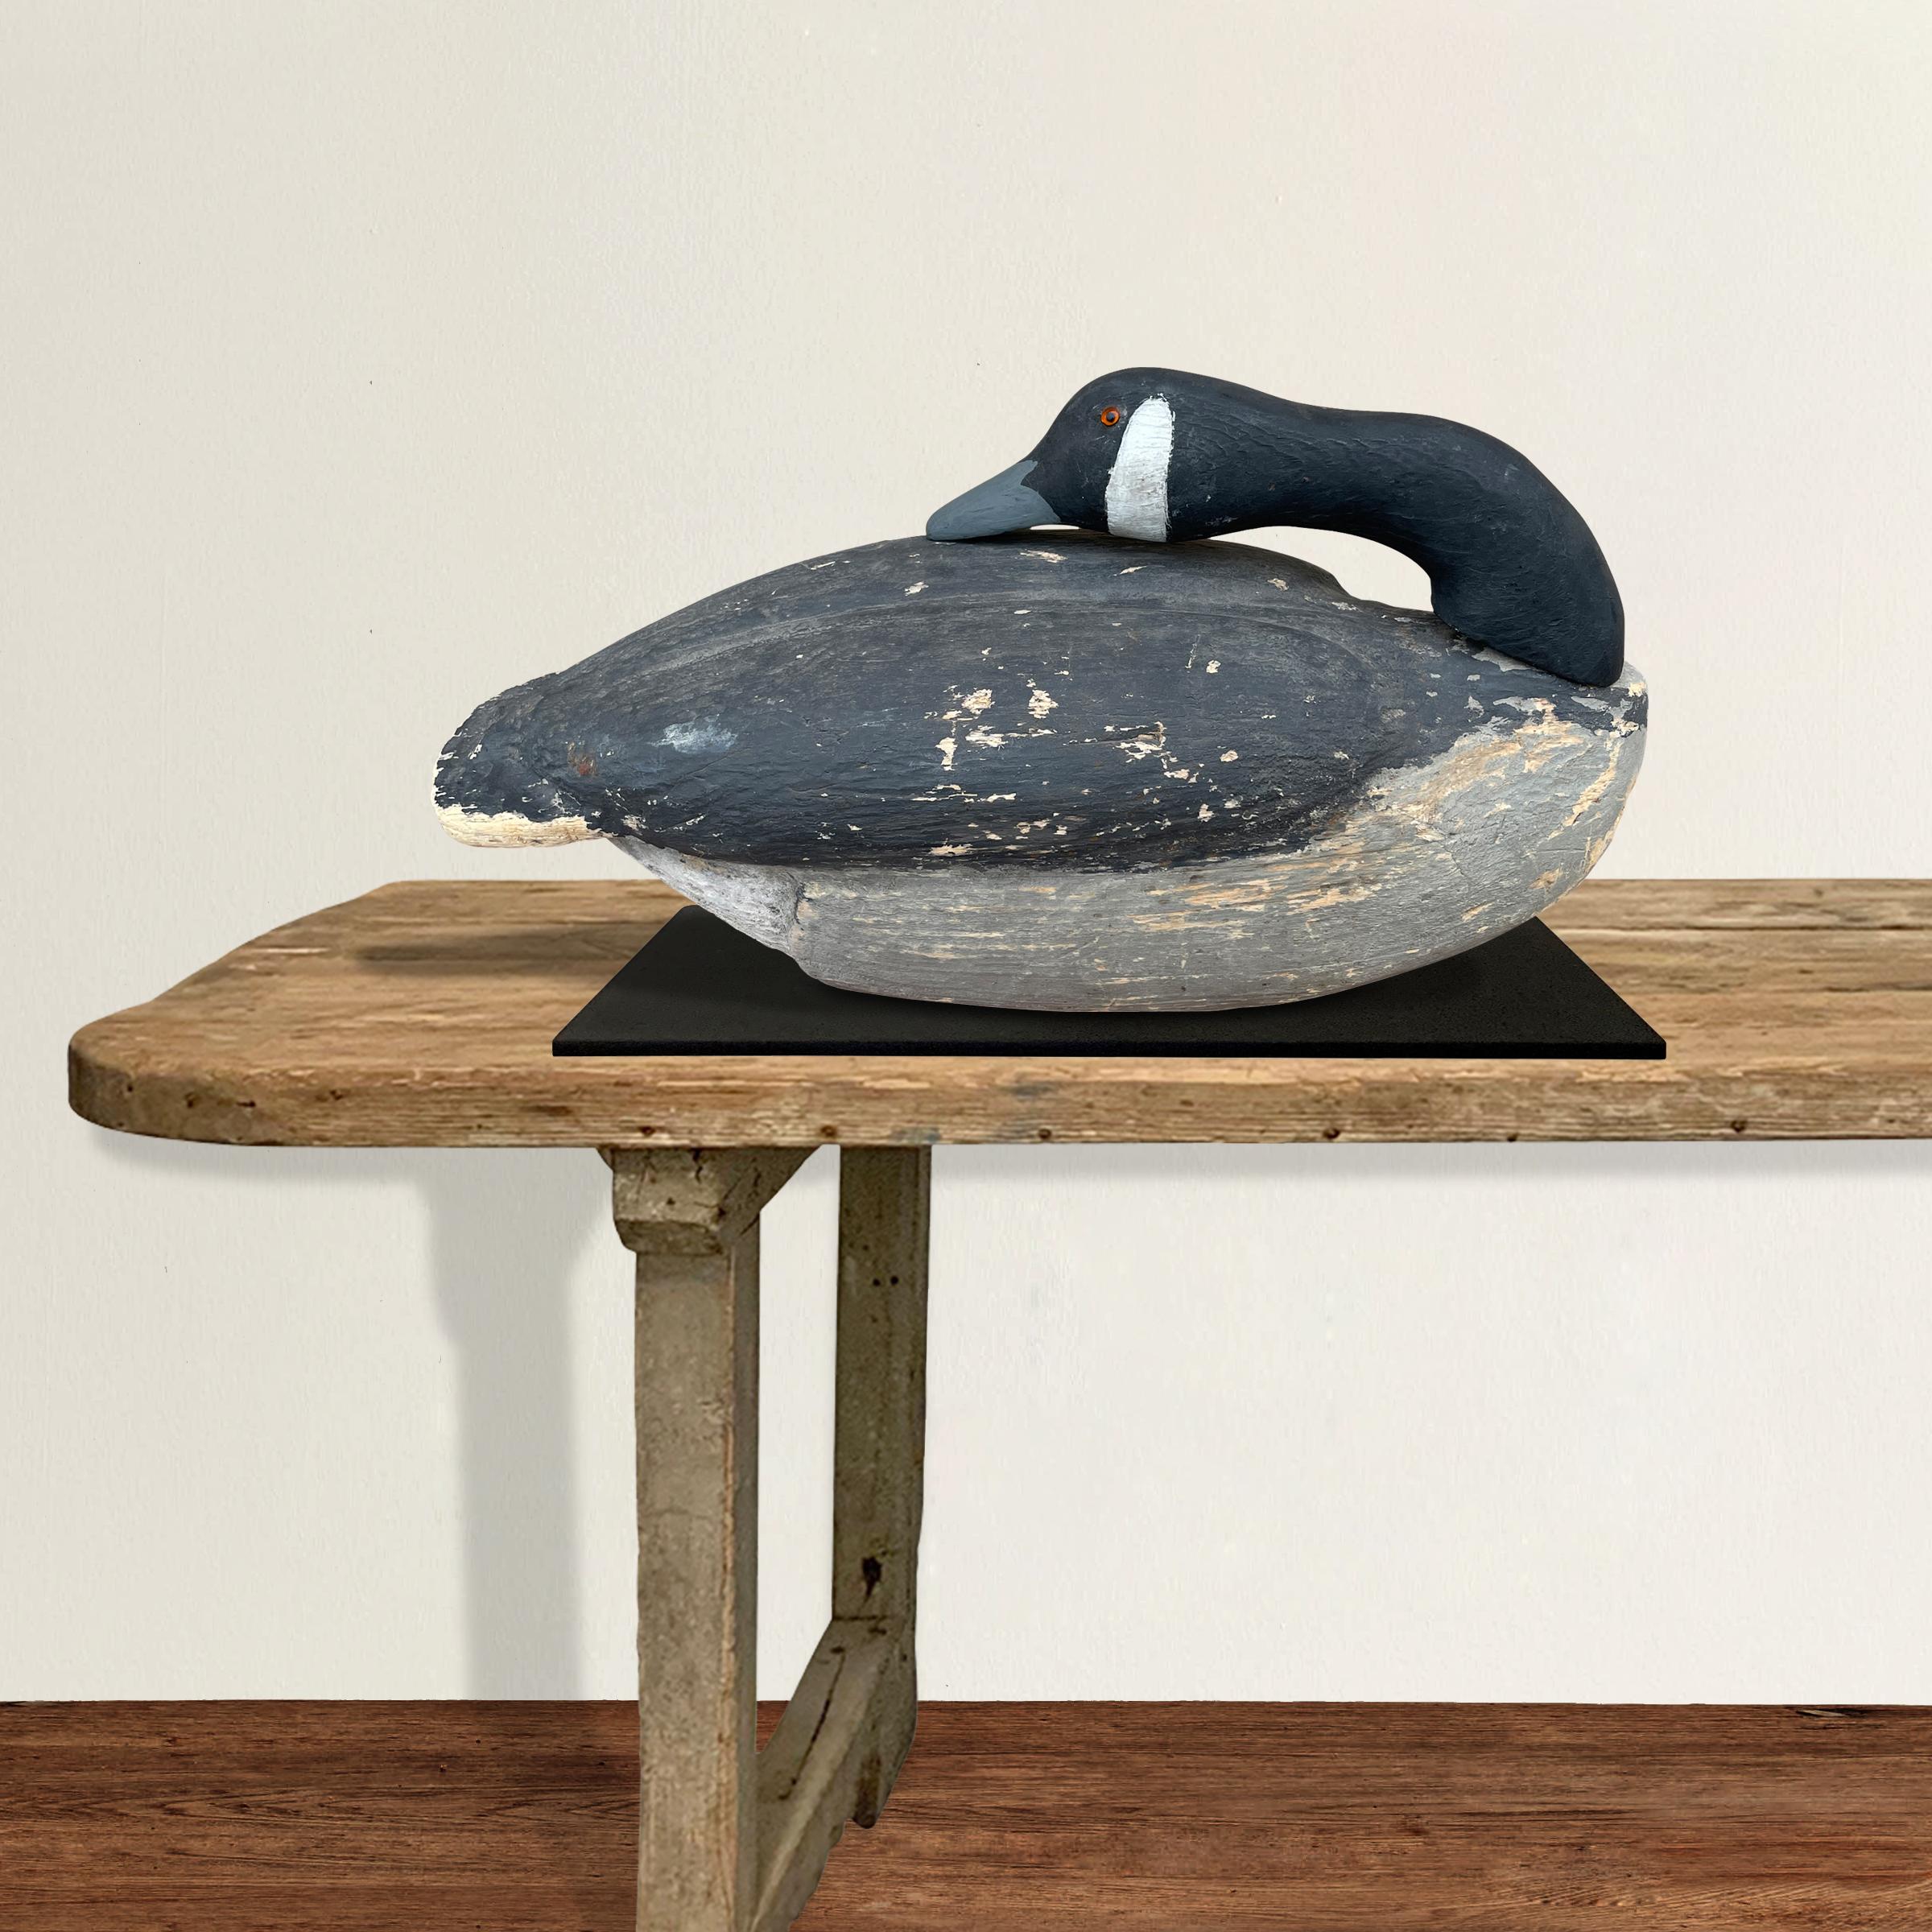 A beautiful 20th century American life-size sleeping Canada Goose decoy with its original paint, a removable head and neck, and glass eyes, on a custom steel mount.